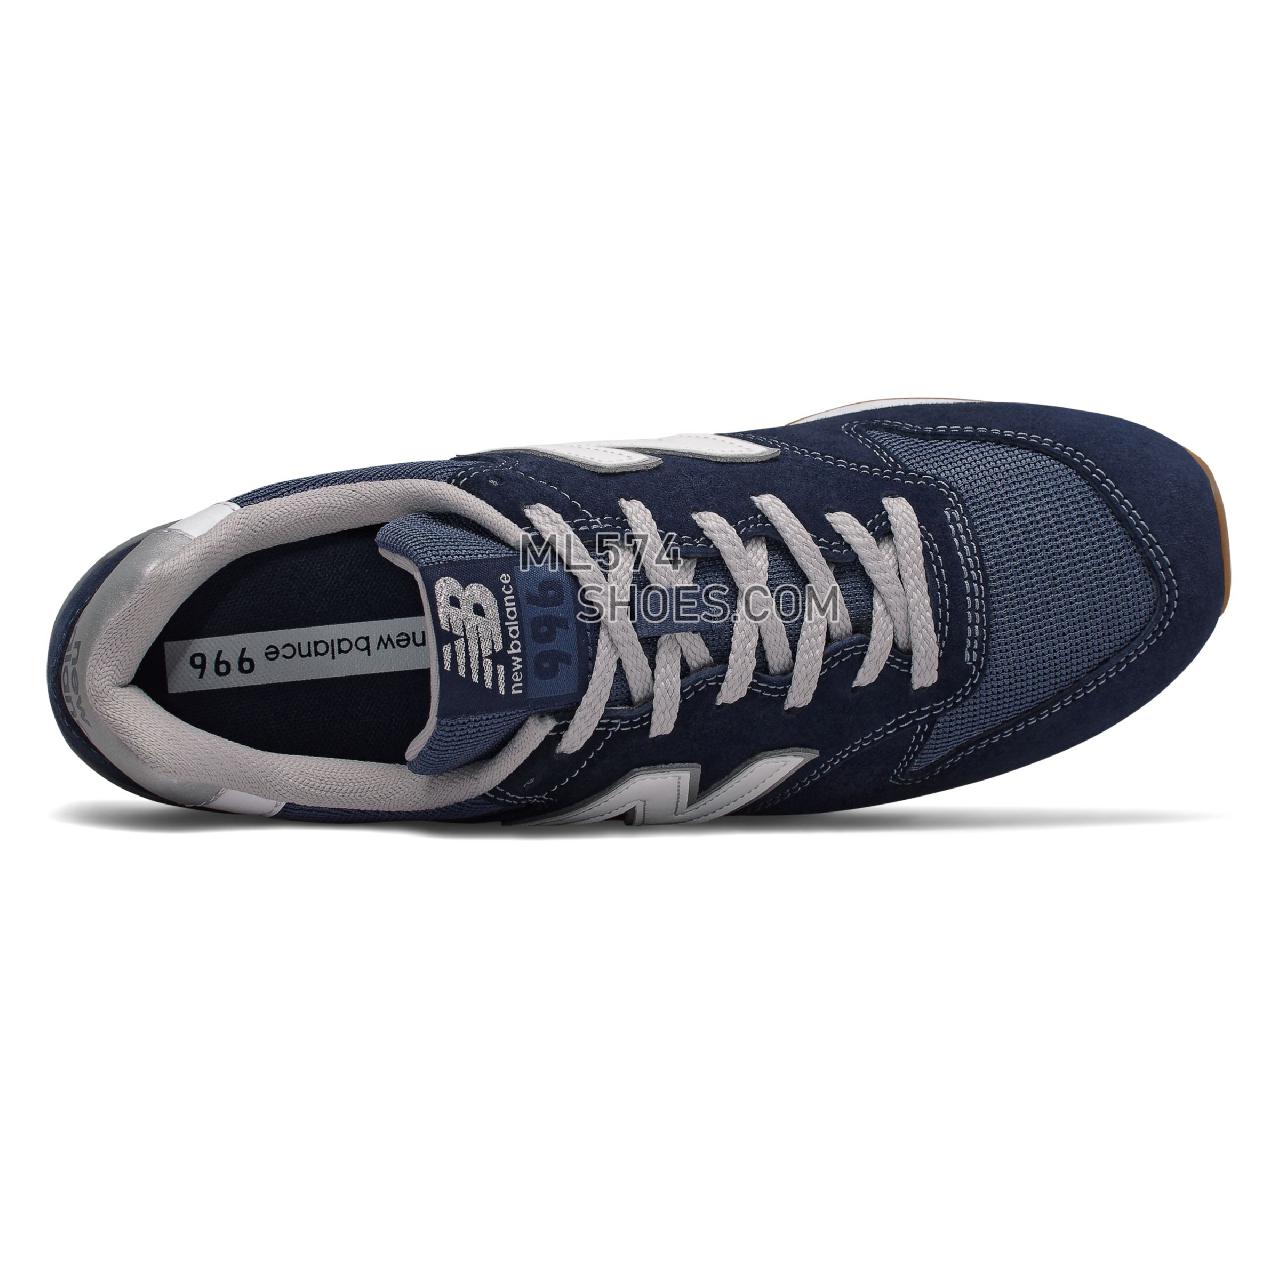 New Balance 996 - Men's Classic Sneakers - Natural Indigo with Munsell White - CM996SMN